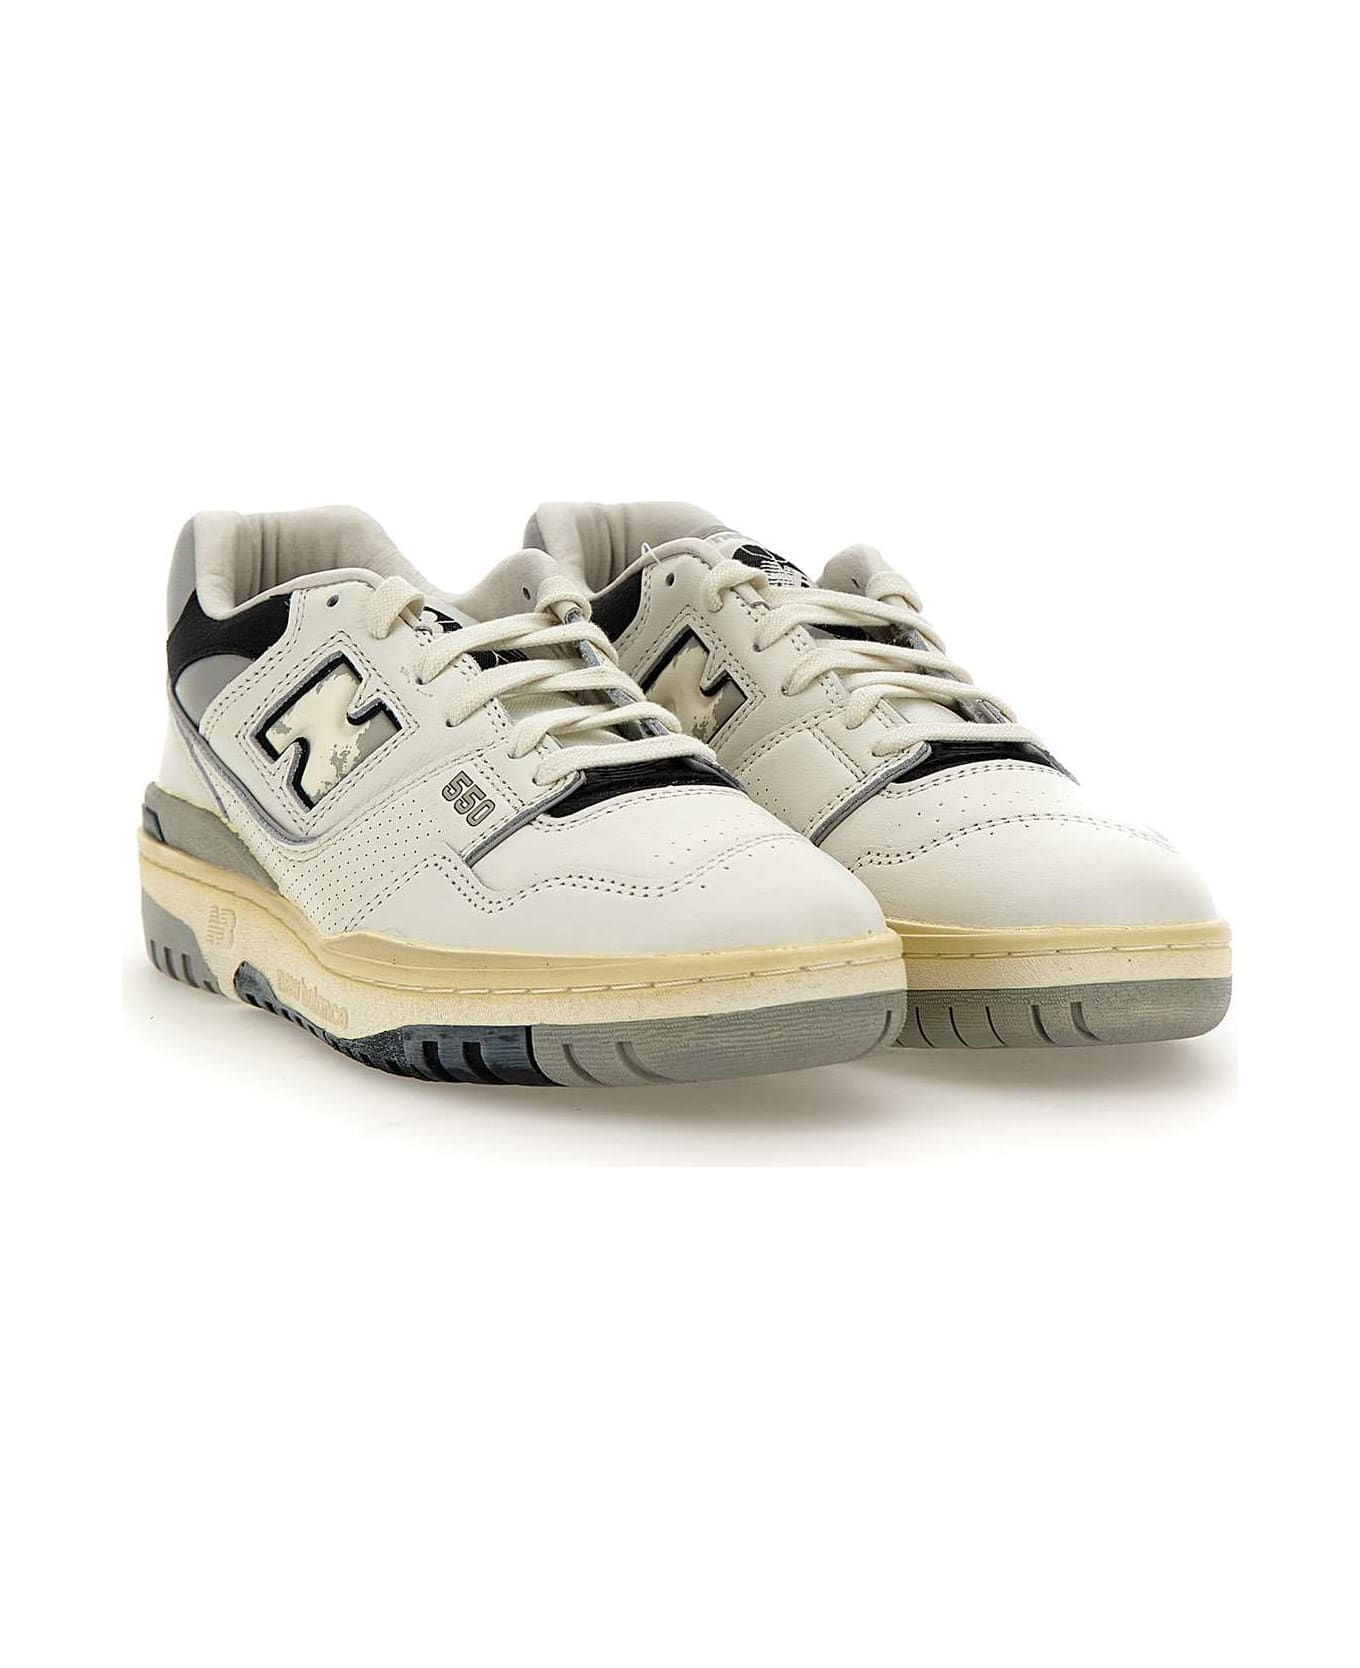 New Balance "550" Leather Sneakers - White-grey